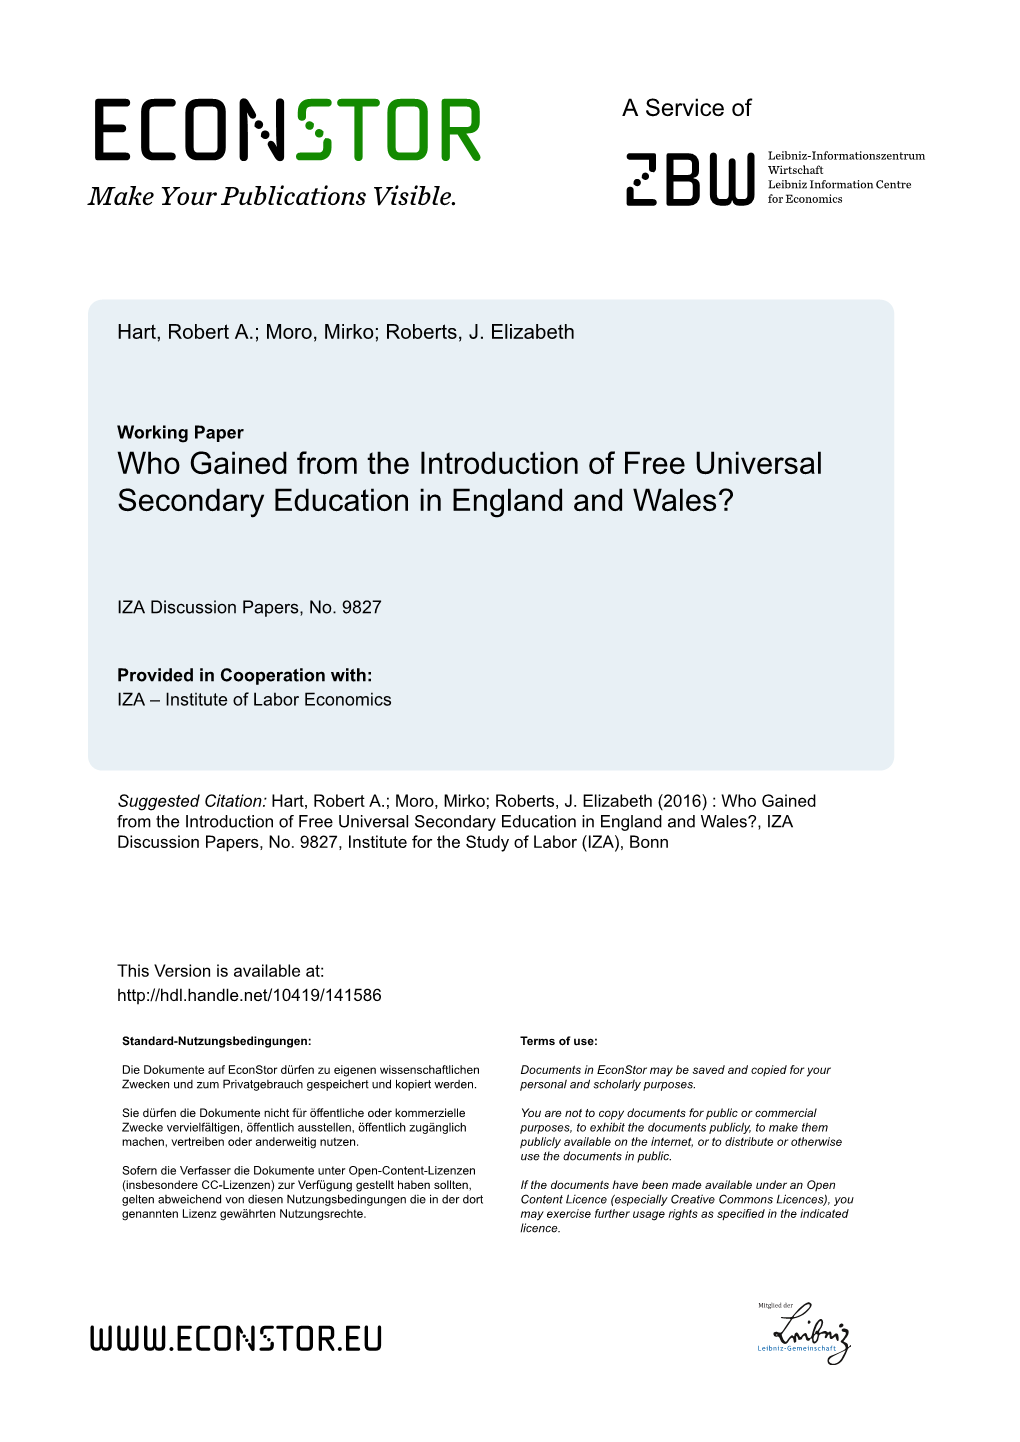 Who Gained from the Introduction of Free Universal Secondary Education in England and Wales?